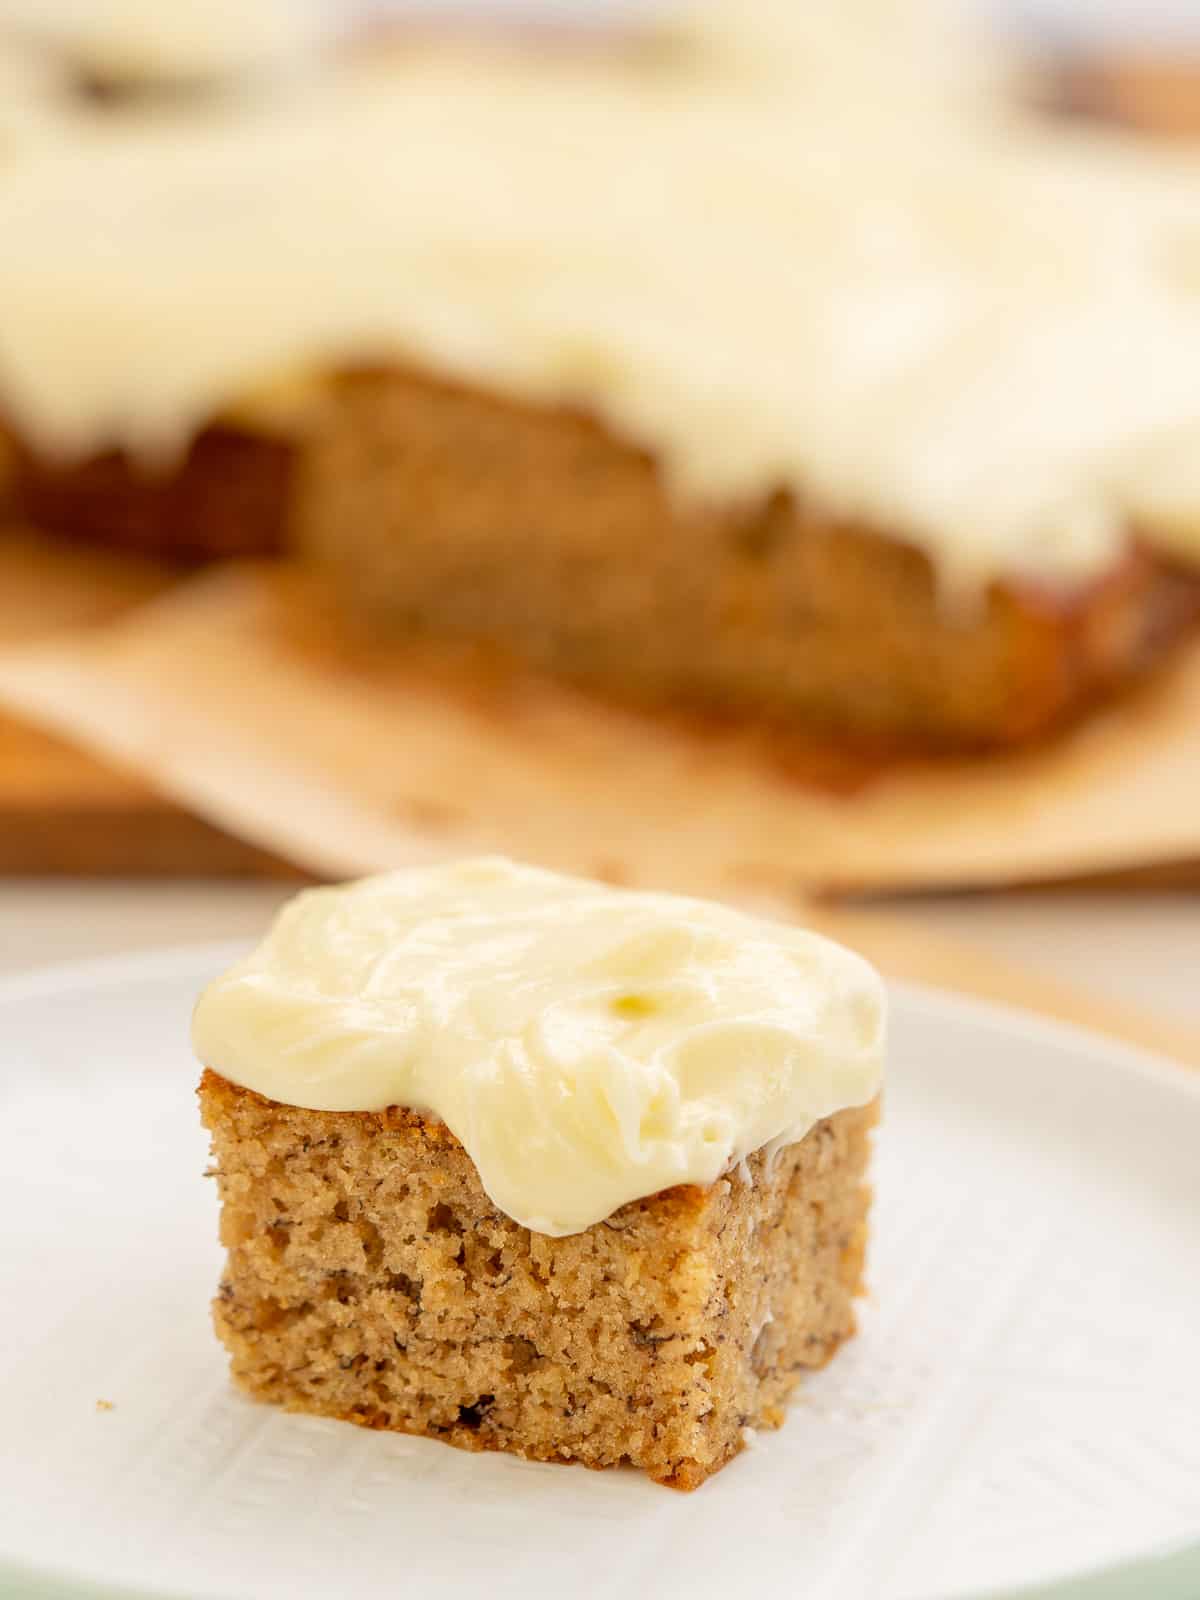 A square piece of banana cake frosted with cream cheese icing sitting on a white plate.